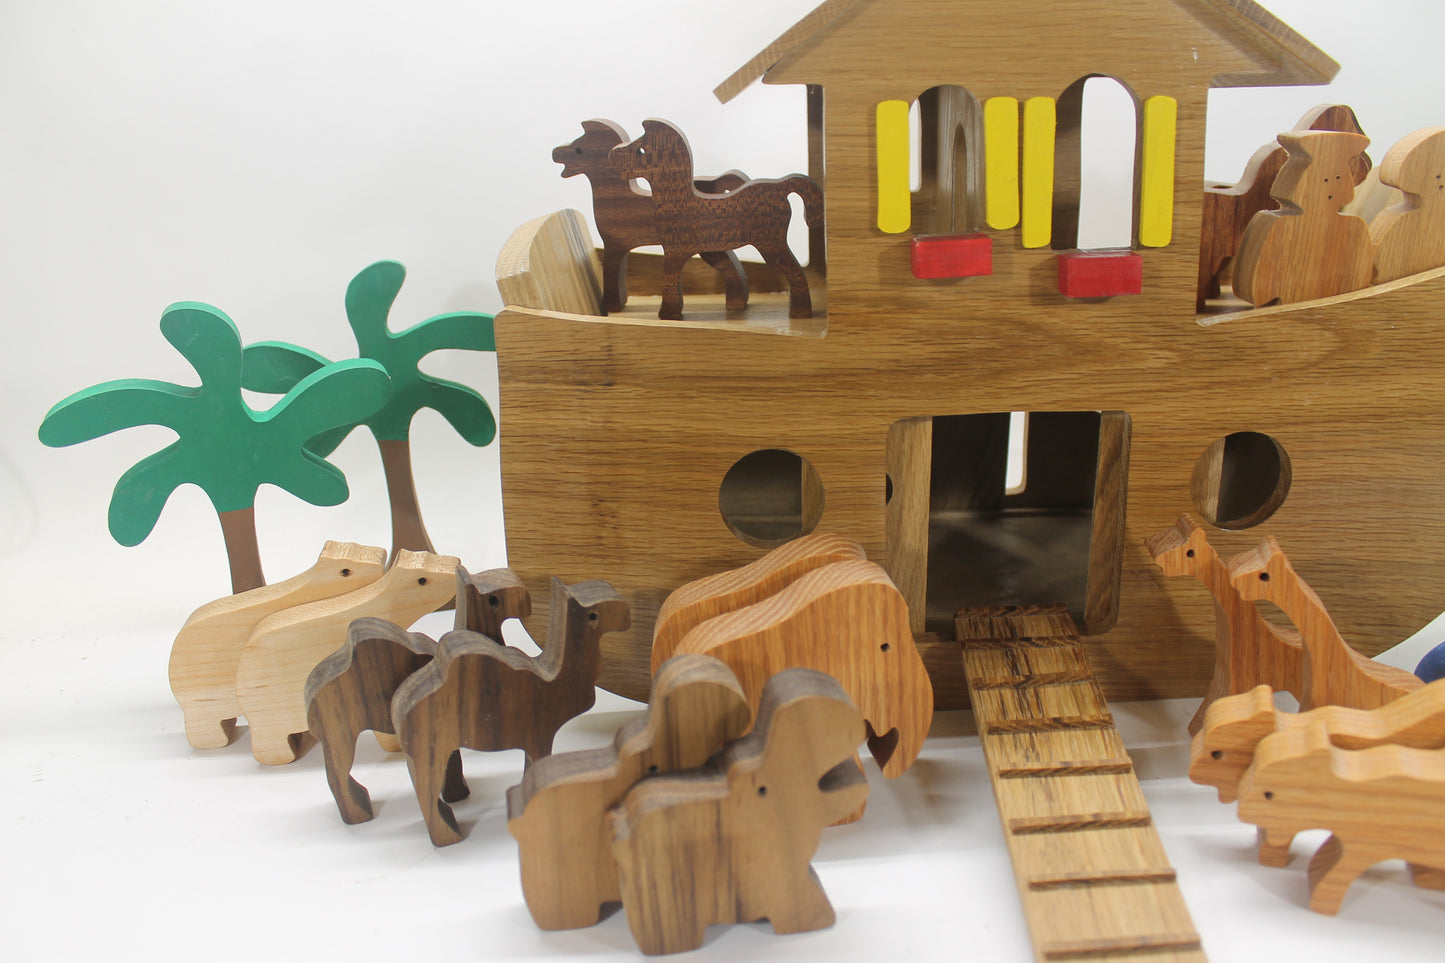 Handcrafted Noah's ark with sliding door entrance, 11 pairs of animals